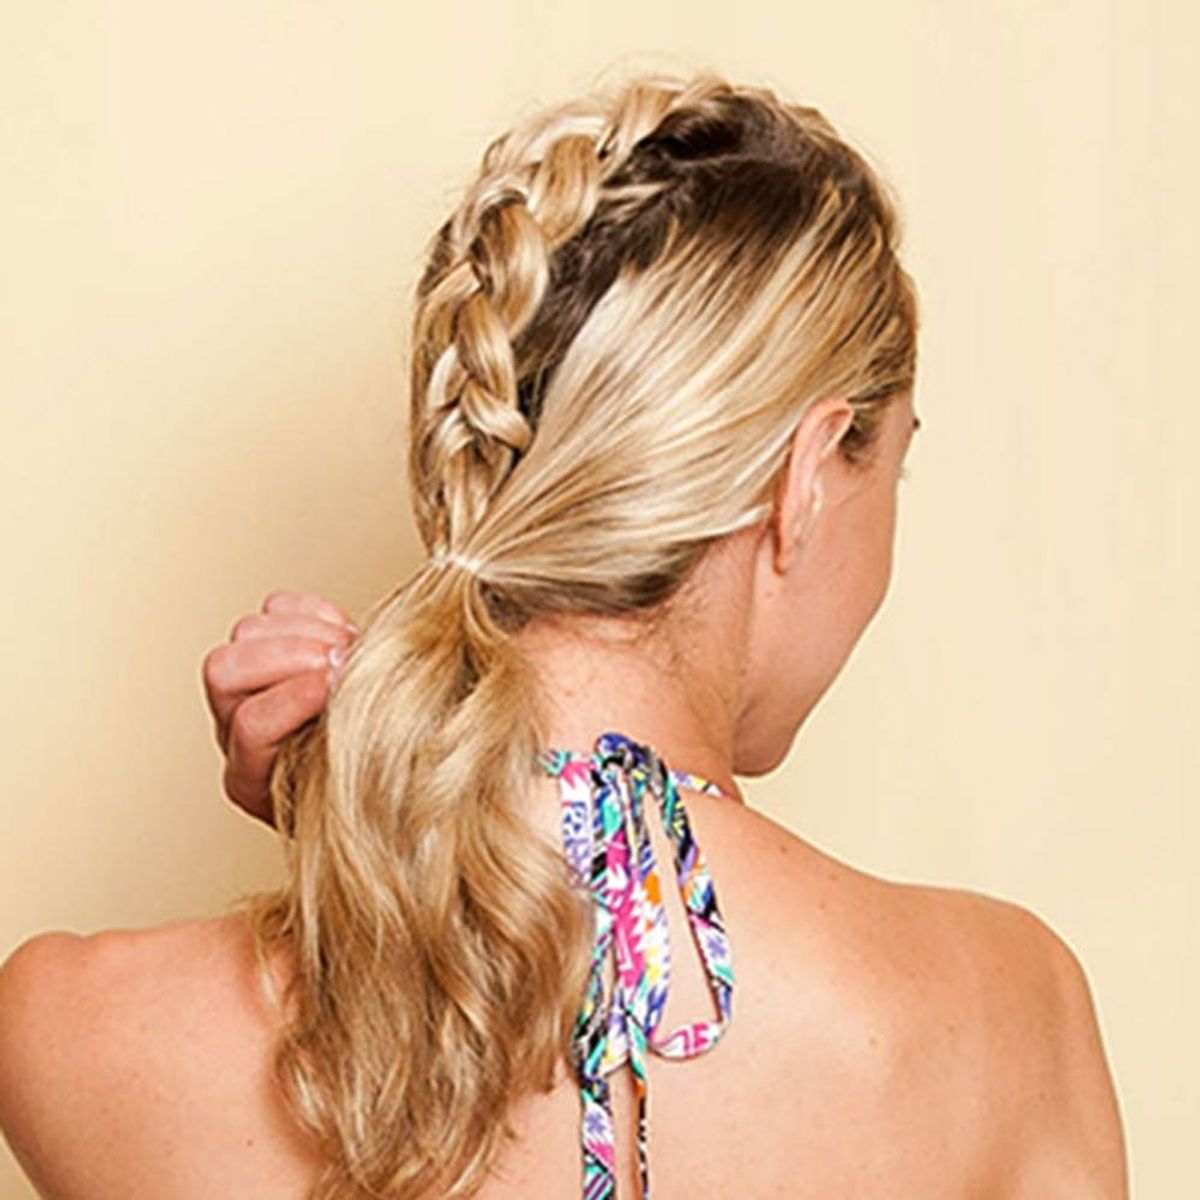 This Braid Is All Party in the Back